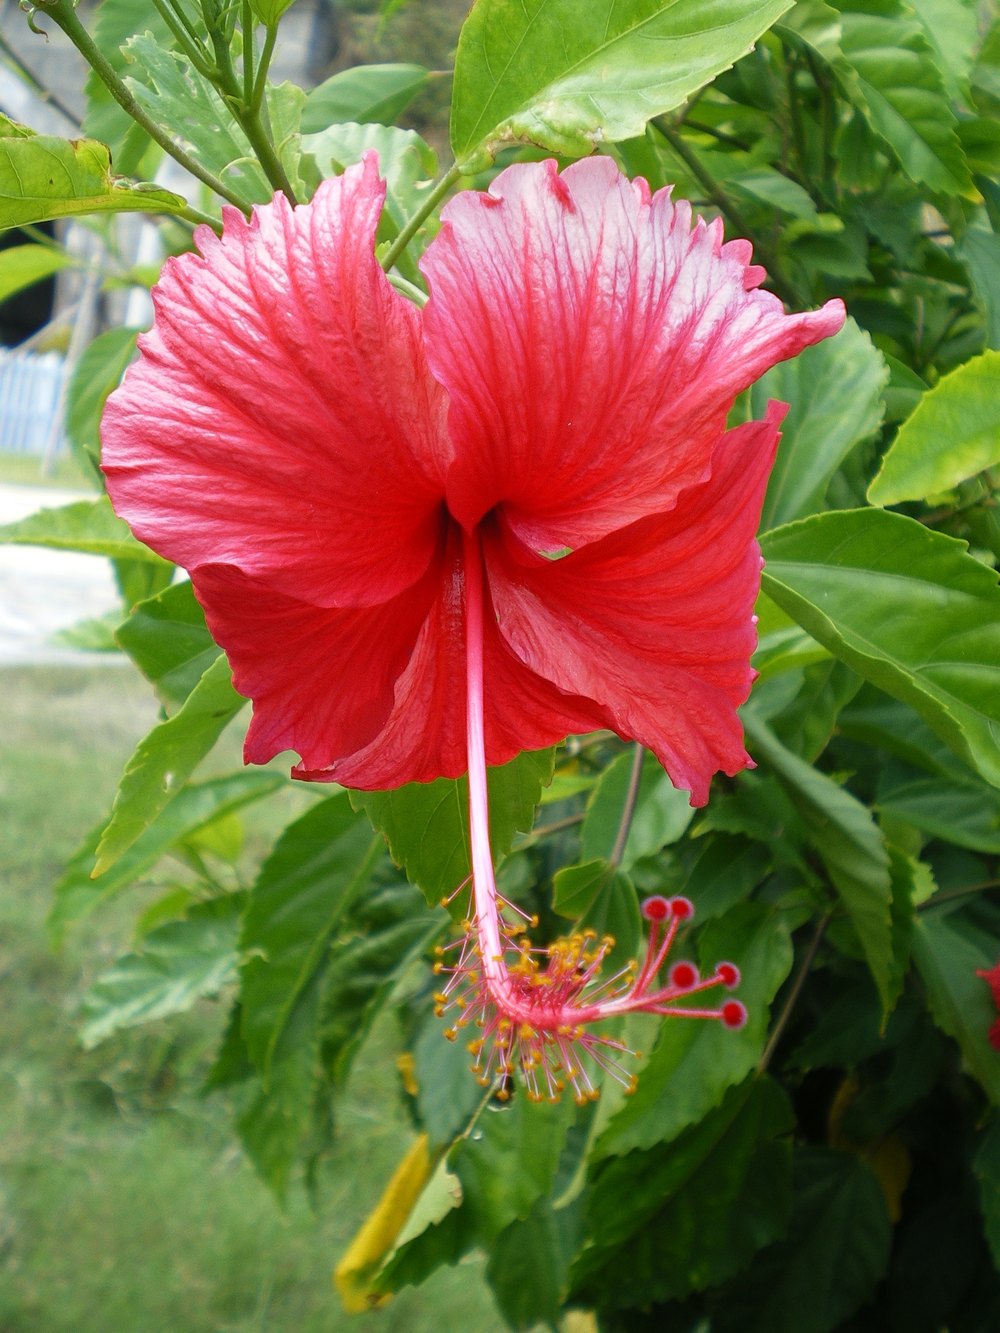 Hibiscus rosa-sinesis, or more commonly known as Bunga Raya, is the symbol of courage, vitality and unity in Malaysia. u00e2u20acu201d Picture from Pexels